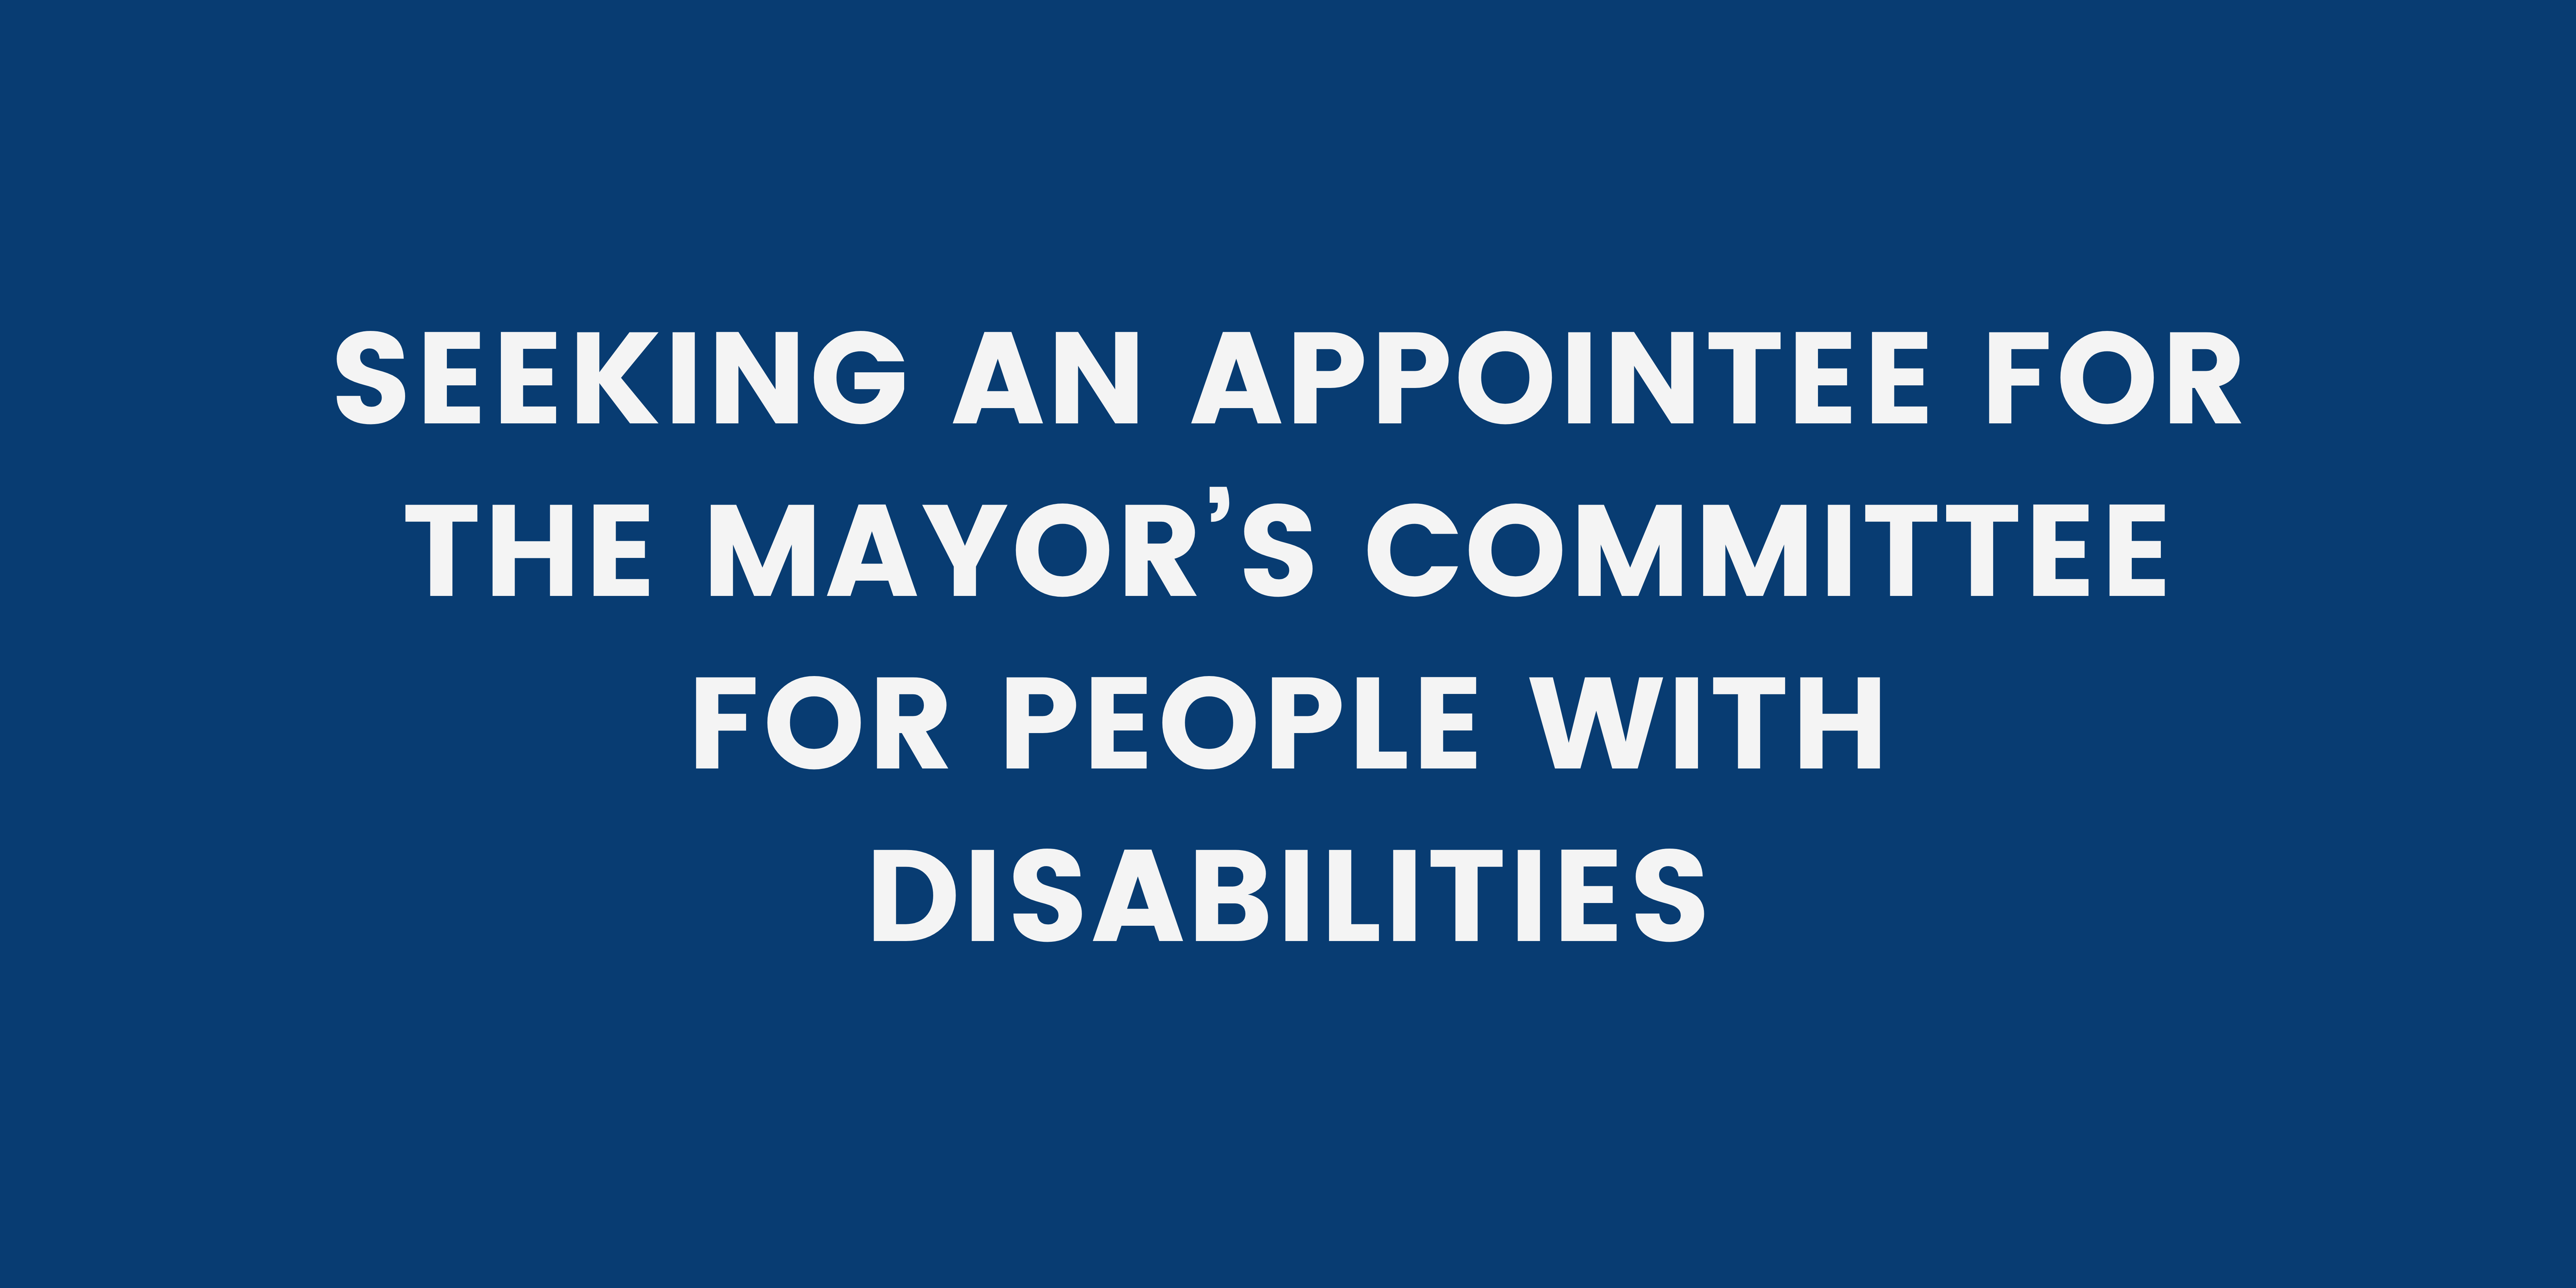 seeking an appointee for the mayor's committee for people with disabilities